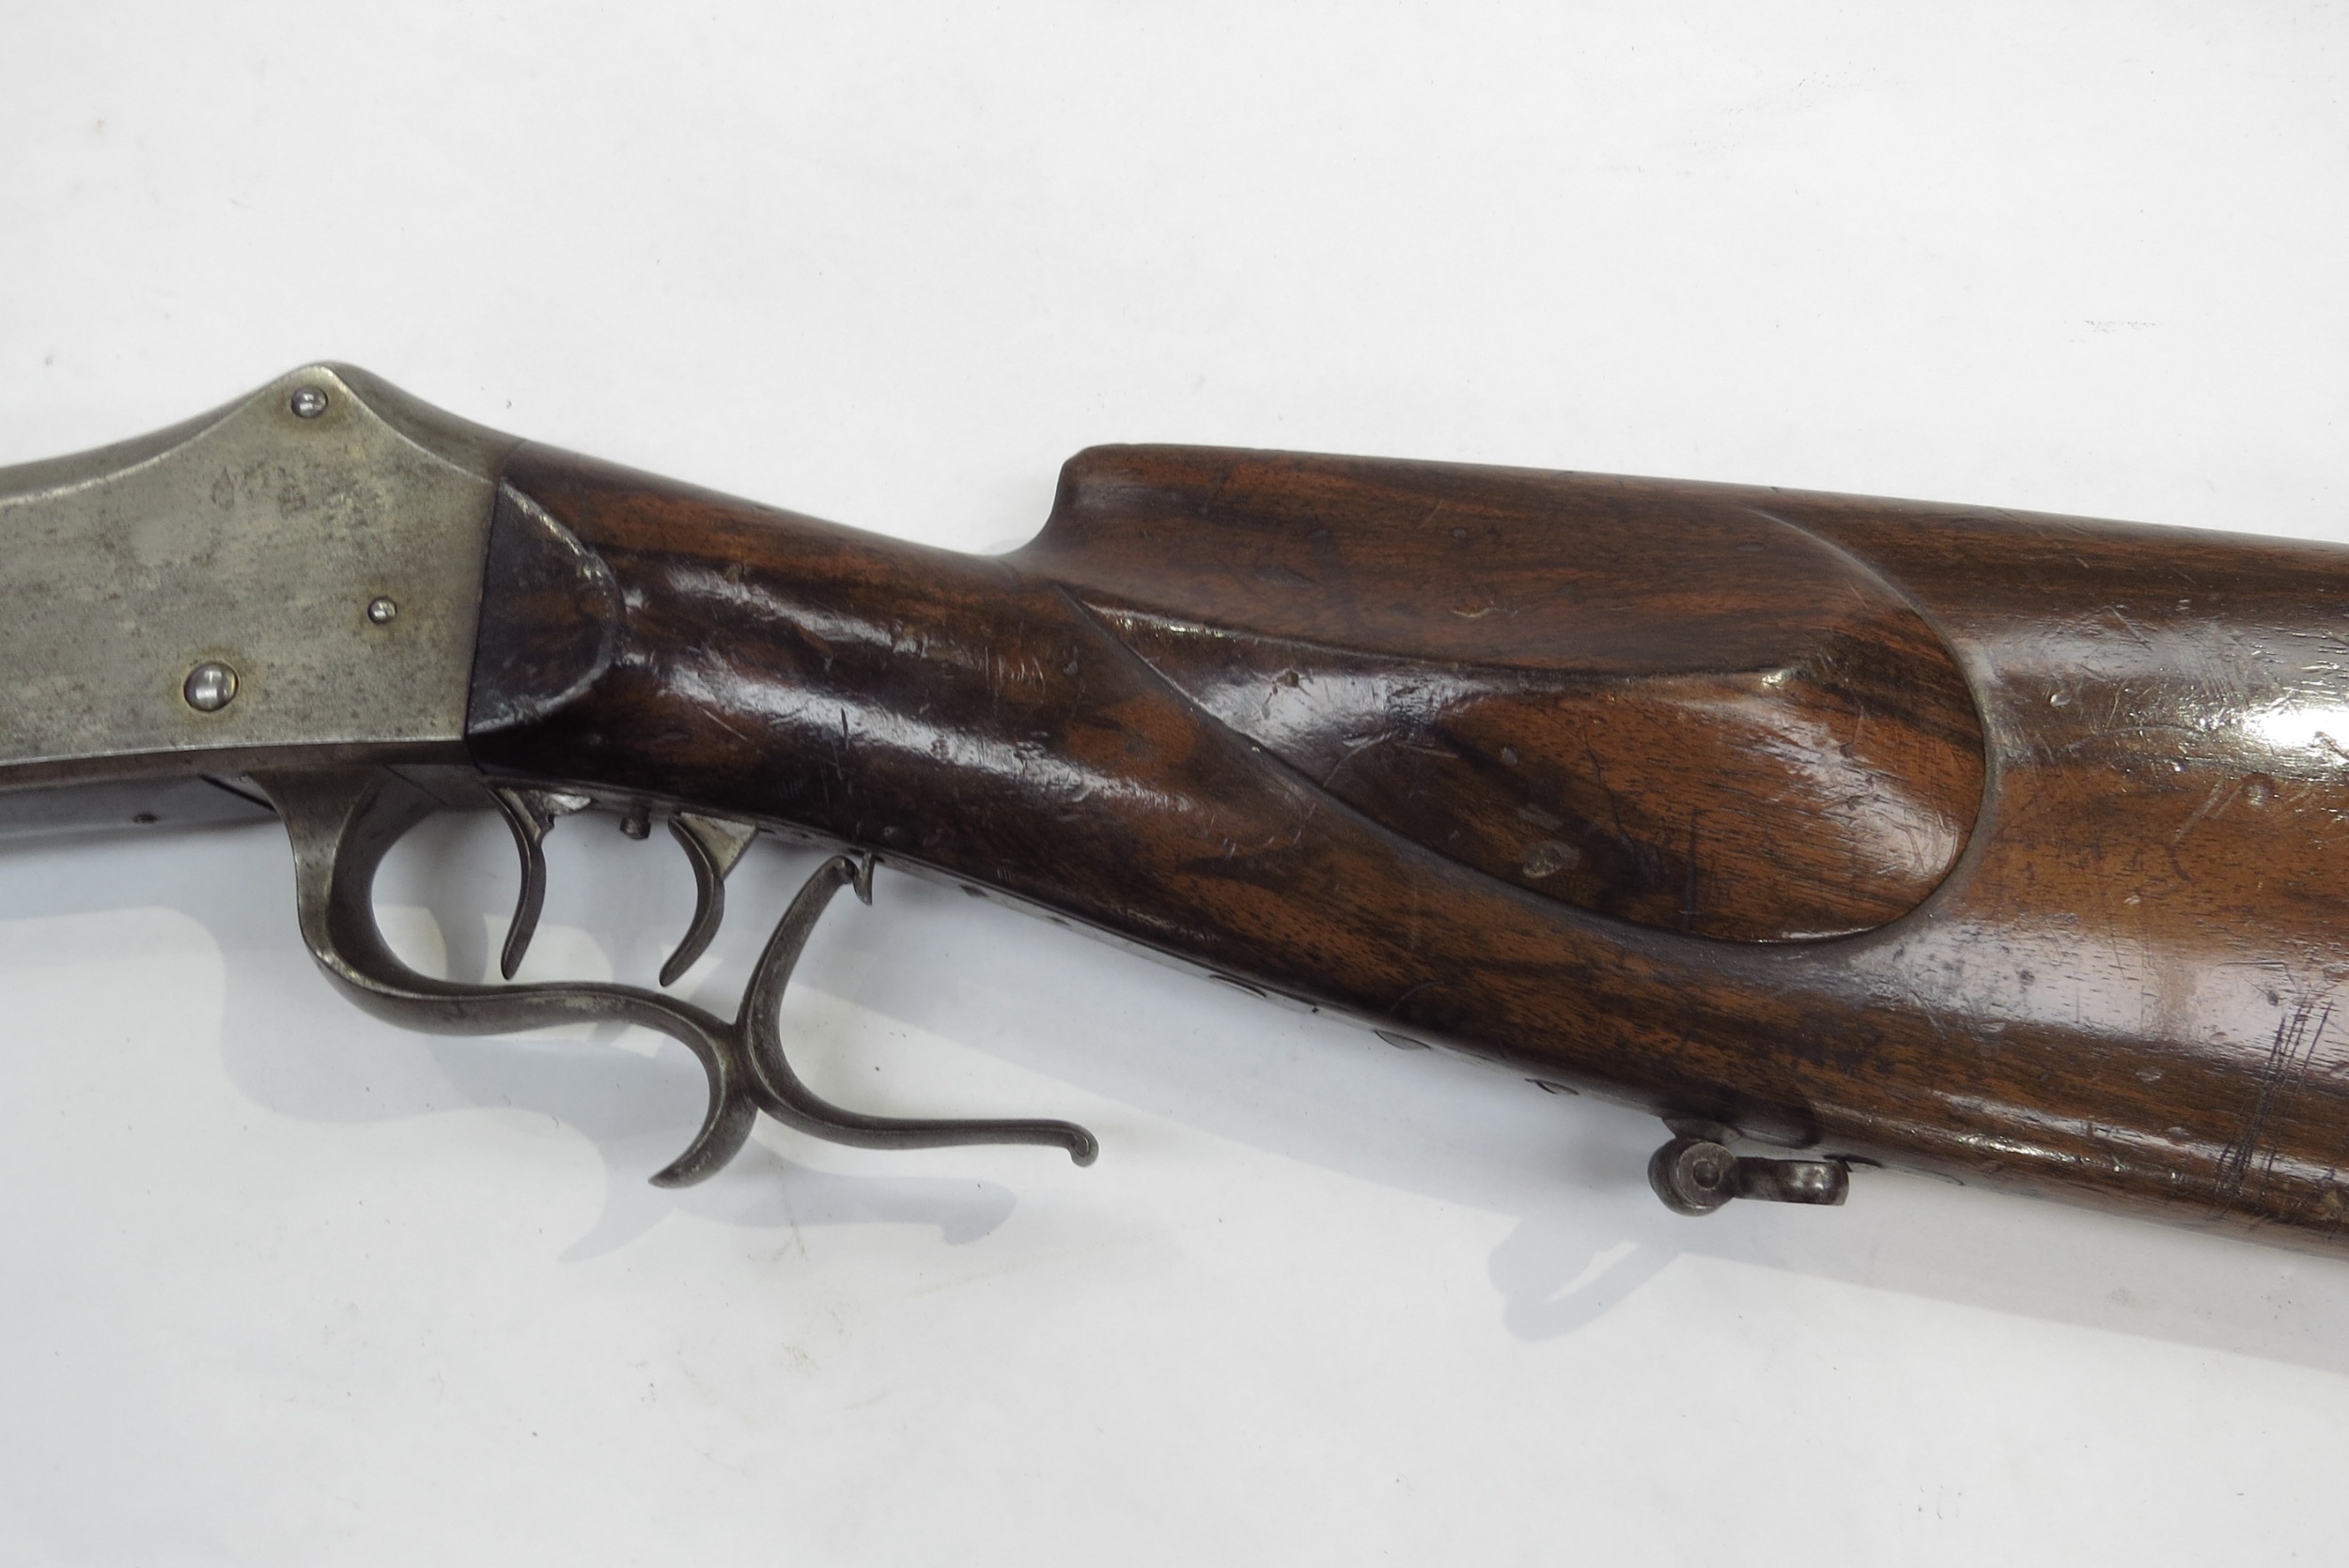 A late 19th Century Swiss Martini action obsolete calibre 7.5 x 53 rimless cartridge target rifle, - Image 6 of 8